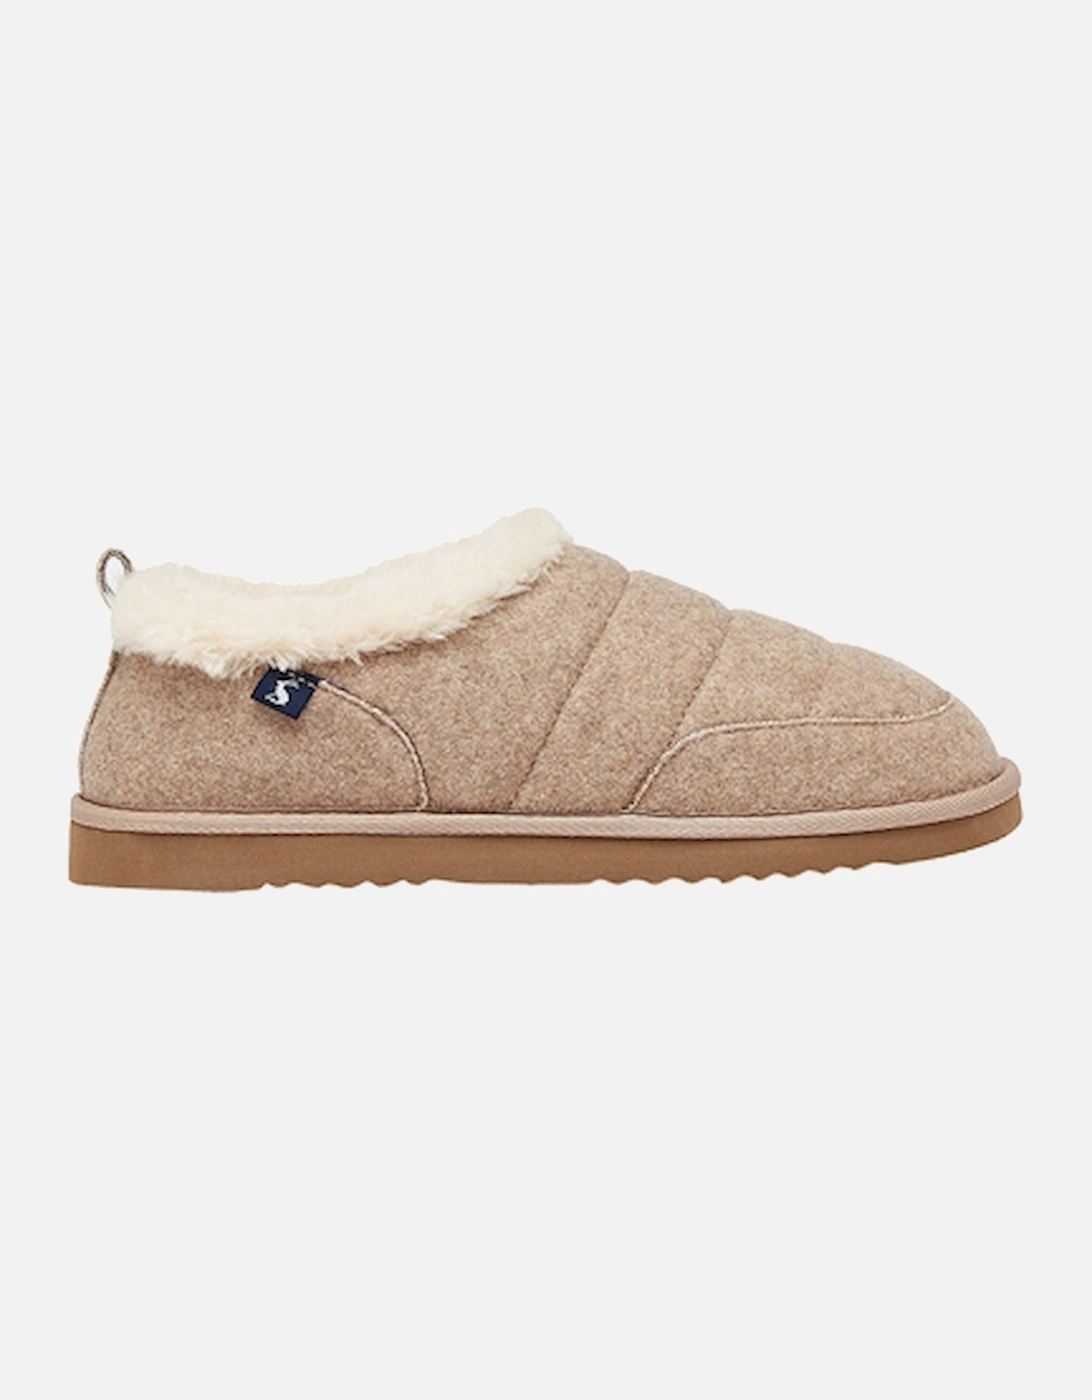 Women's Lazydays Oatmeal Faux Fur Lined Slippers, 7 of 6